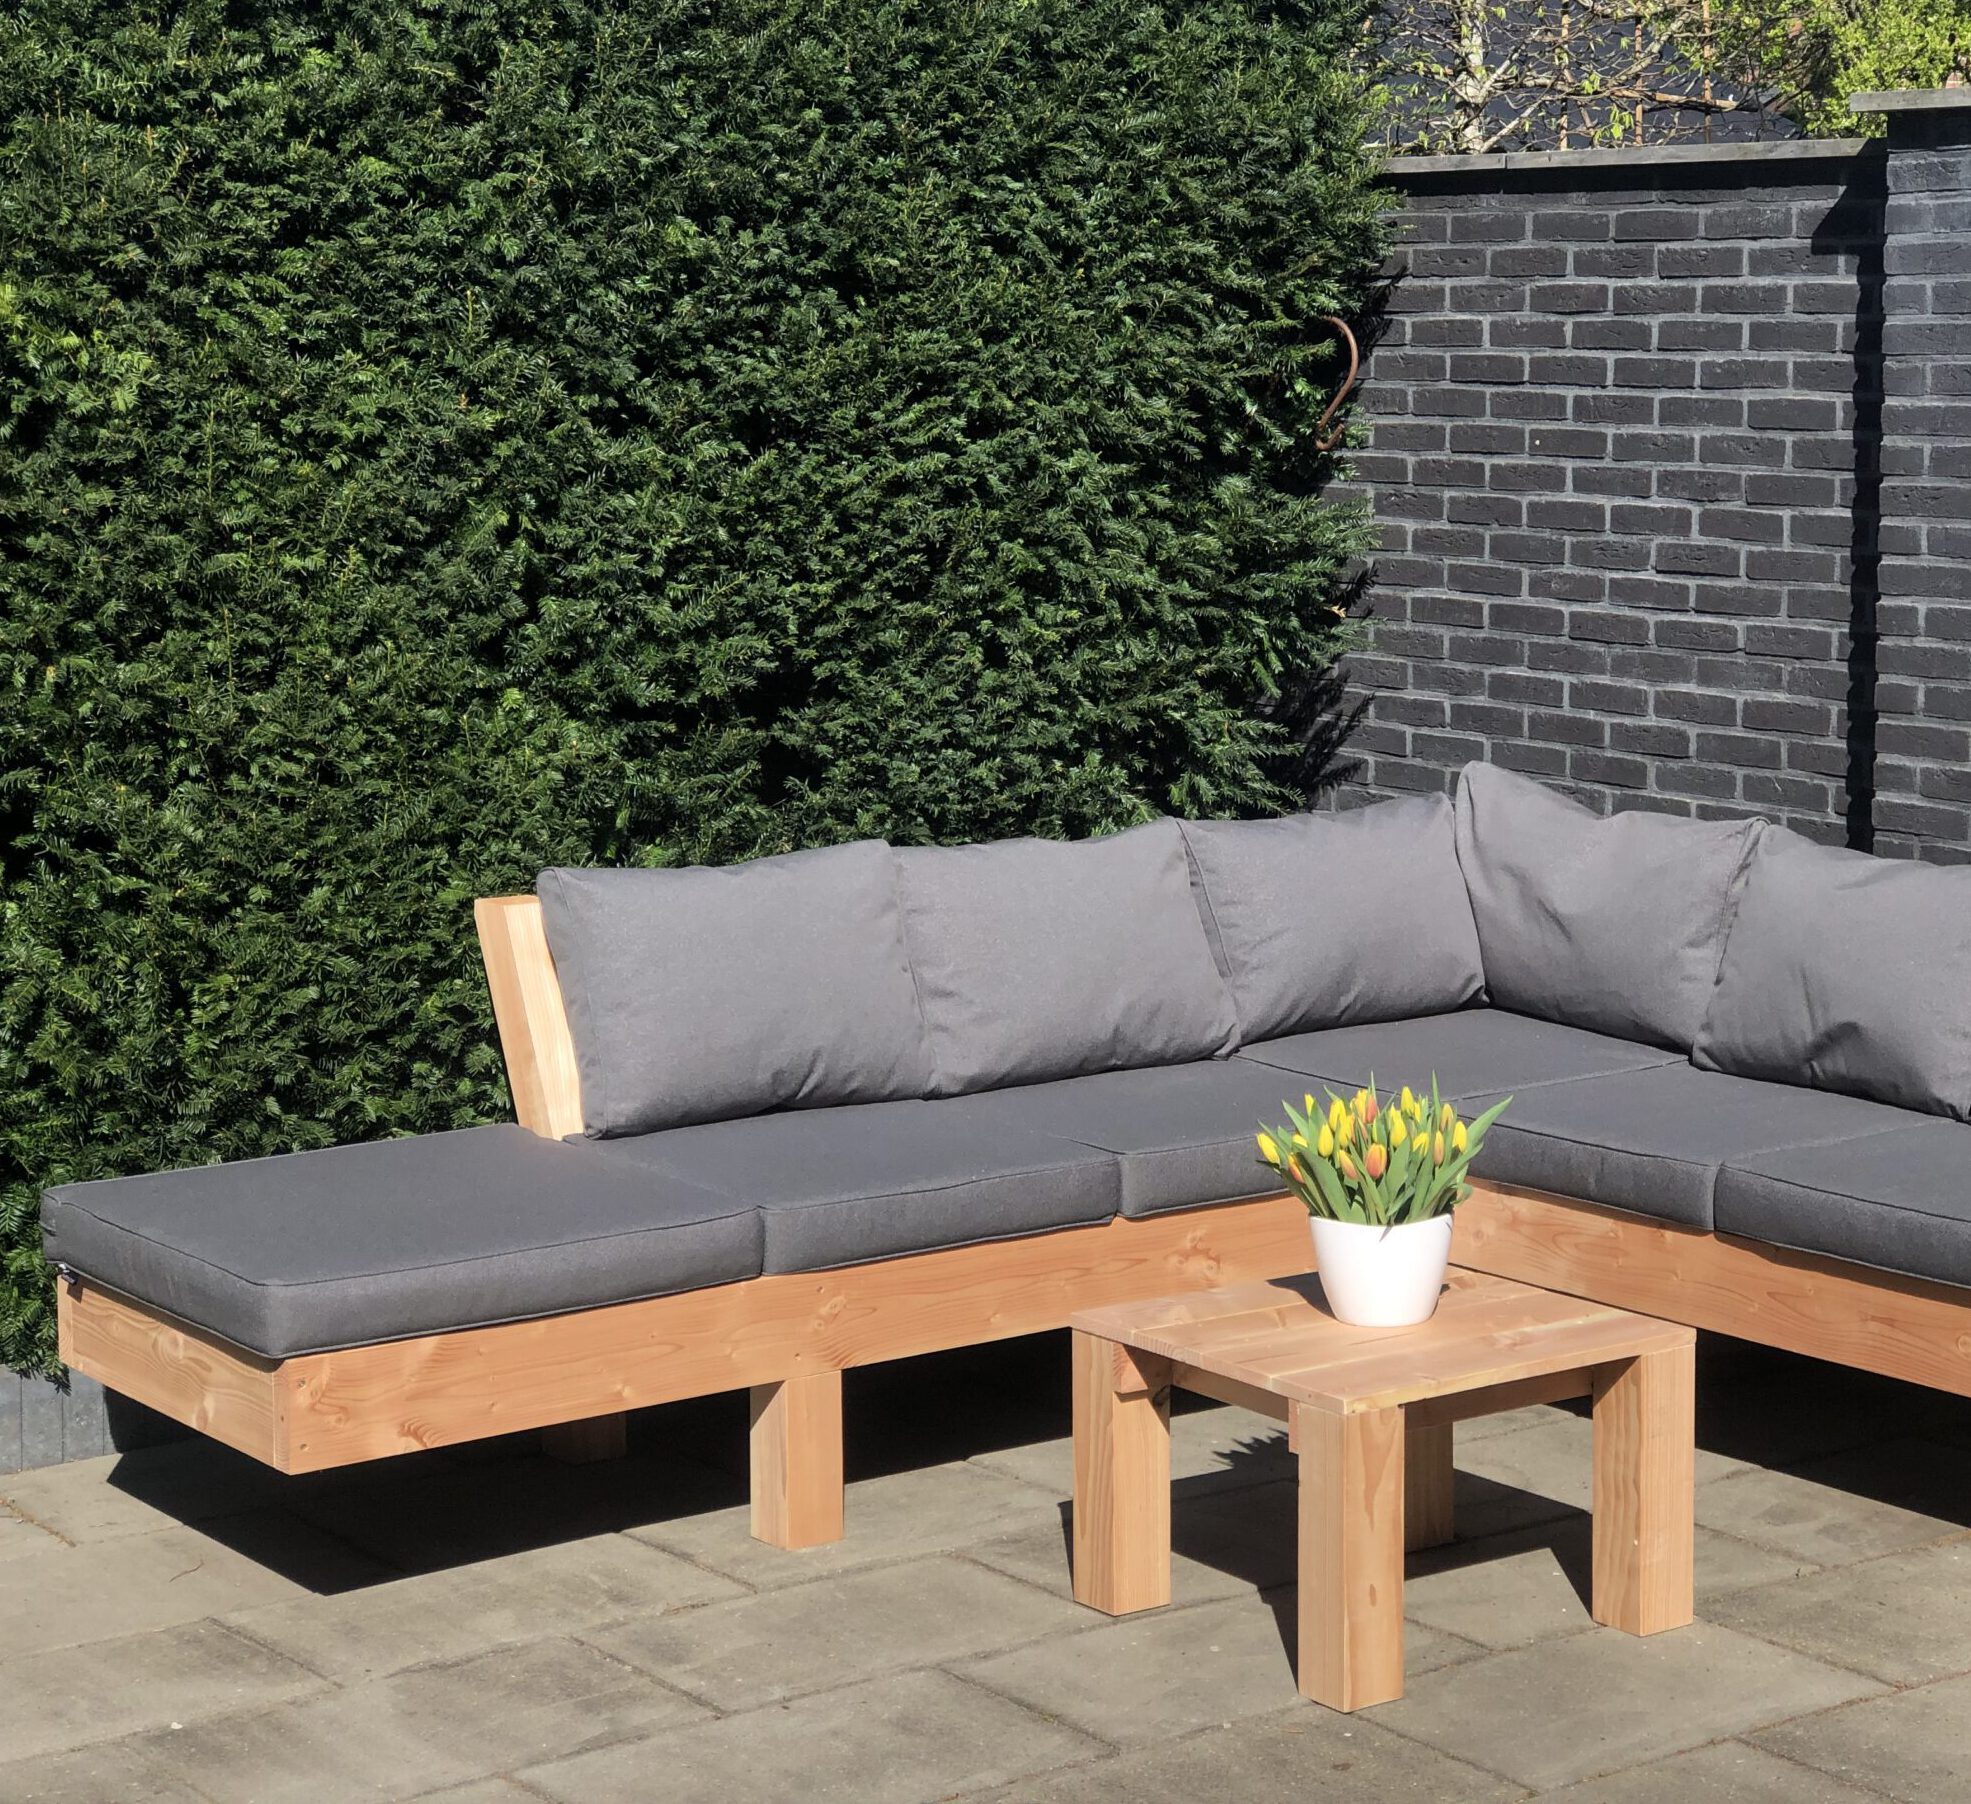 Loungeset chaise longue met kussens Drie - EMH-Tuinmeubelen.nl